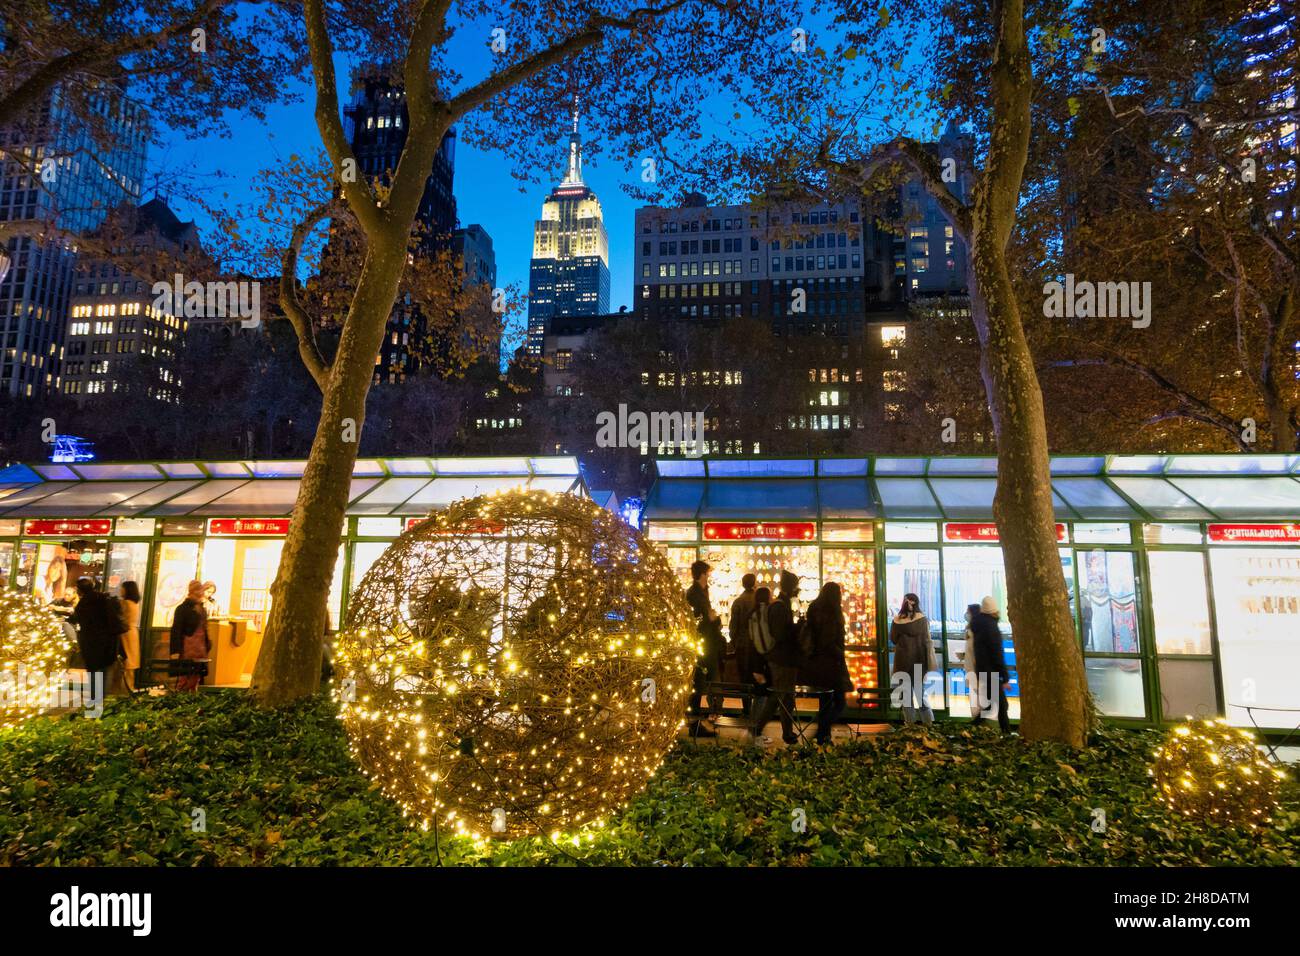 Bank of America Winter Village at Bryant Park with the Empire State Building looming in the background, New York City, USA Stock Photo